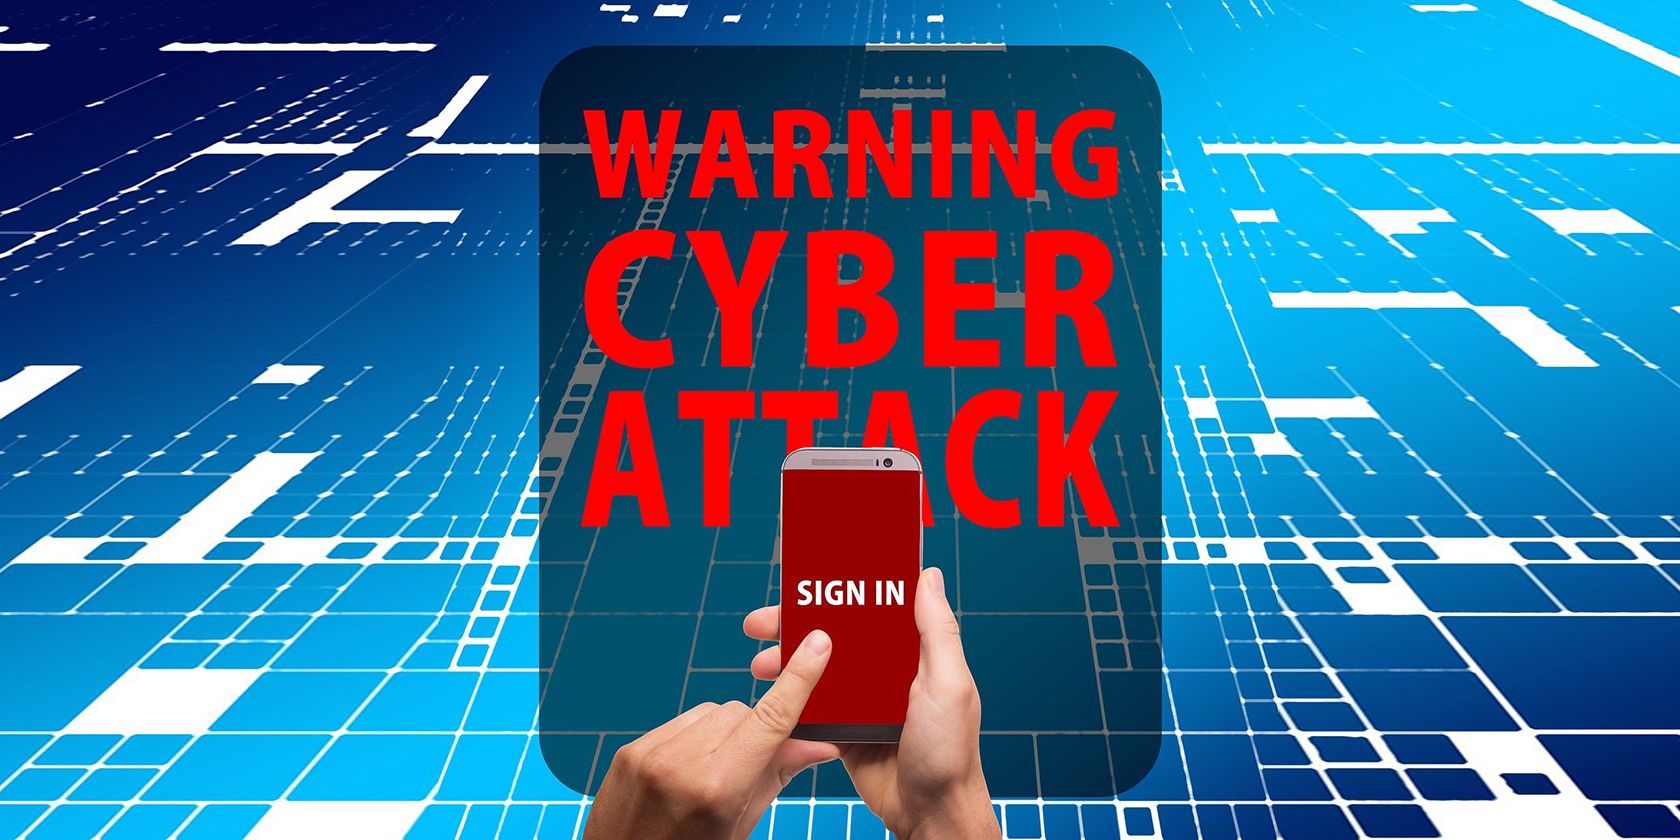 Mobile security - Cyber attack alert